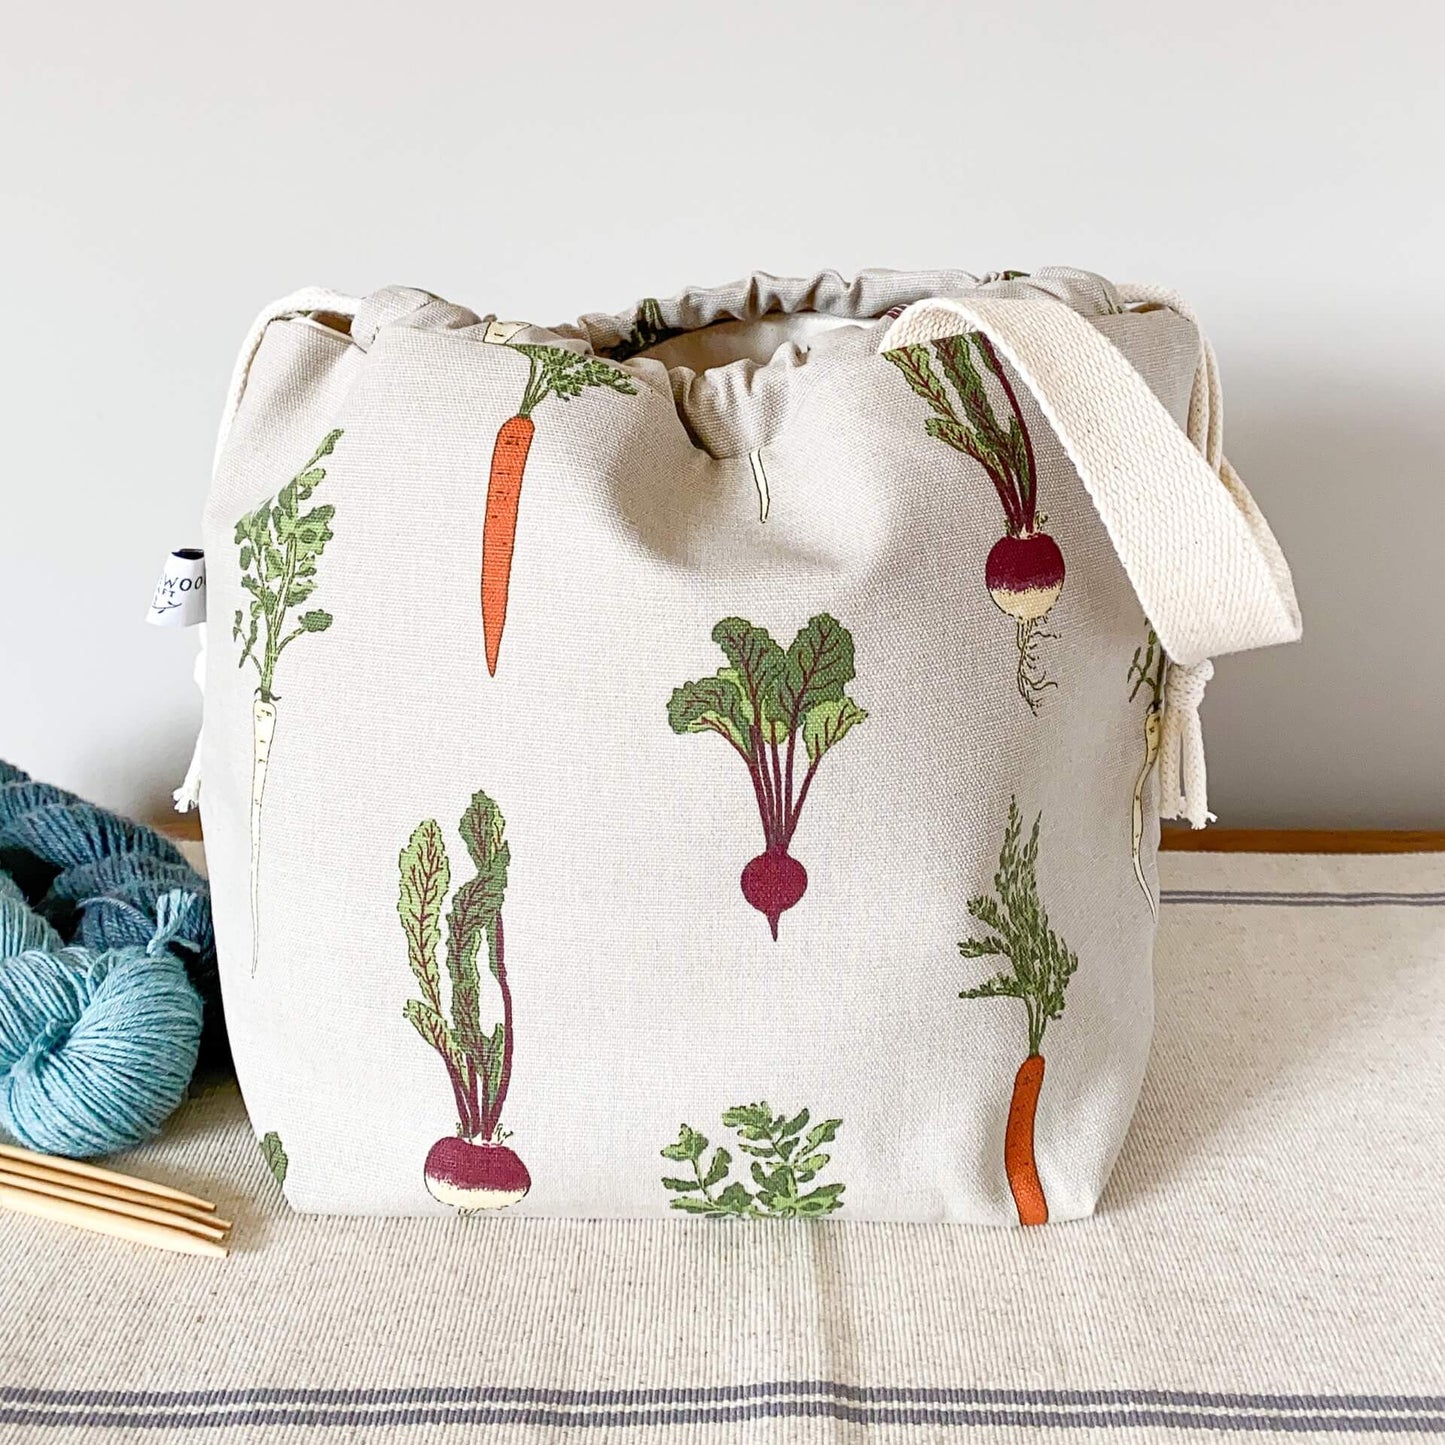 A project bag for knitting projects, made using a fabric showing off lots of home grown vegetables, sits on a table next to some skeins of yarn. 